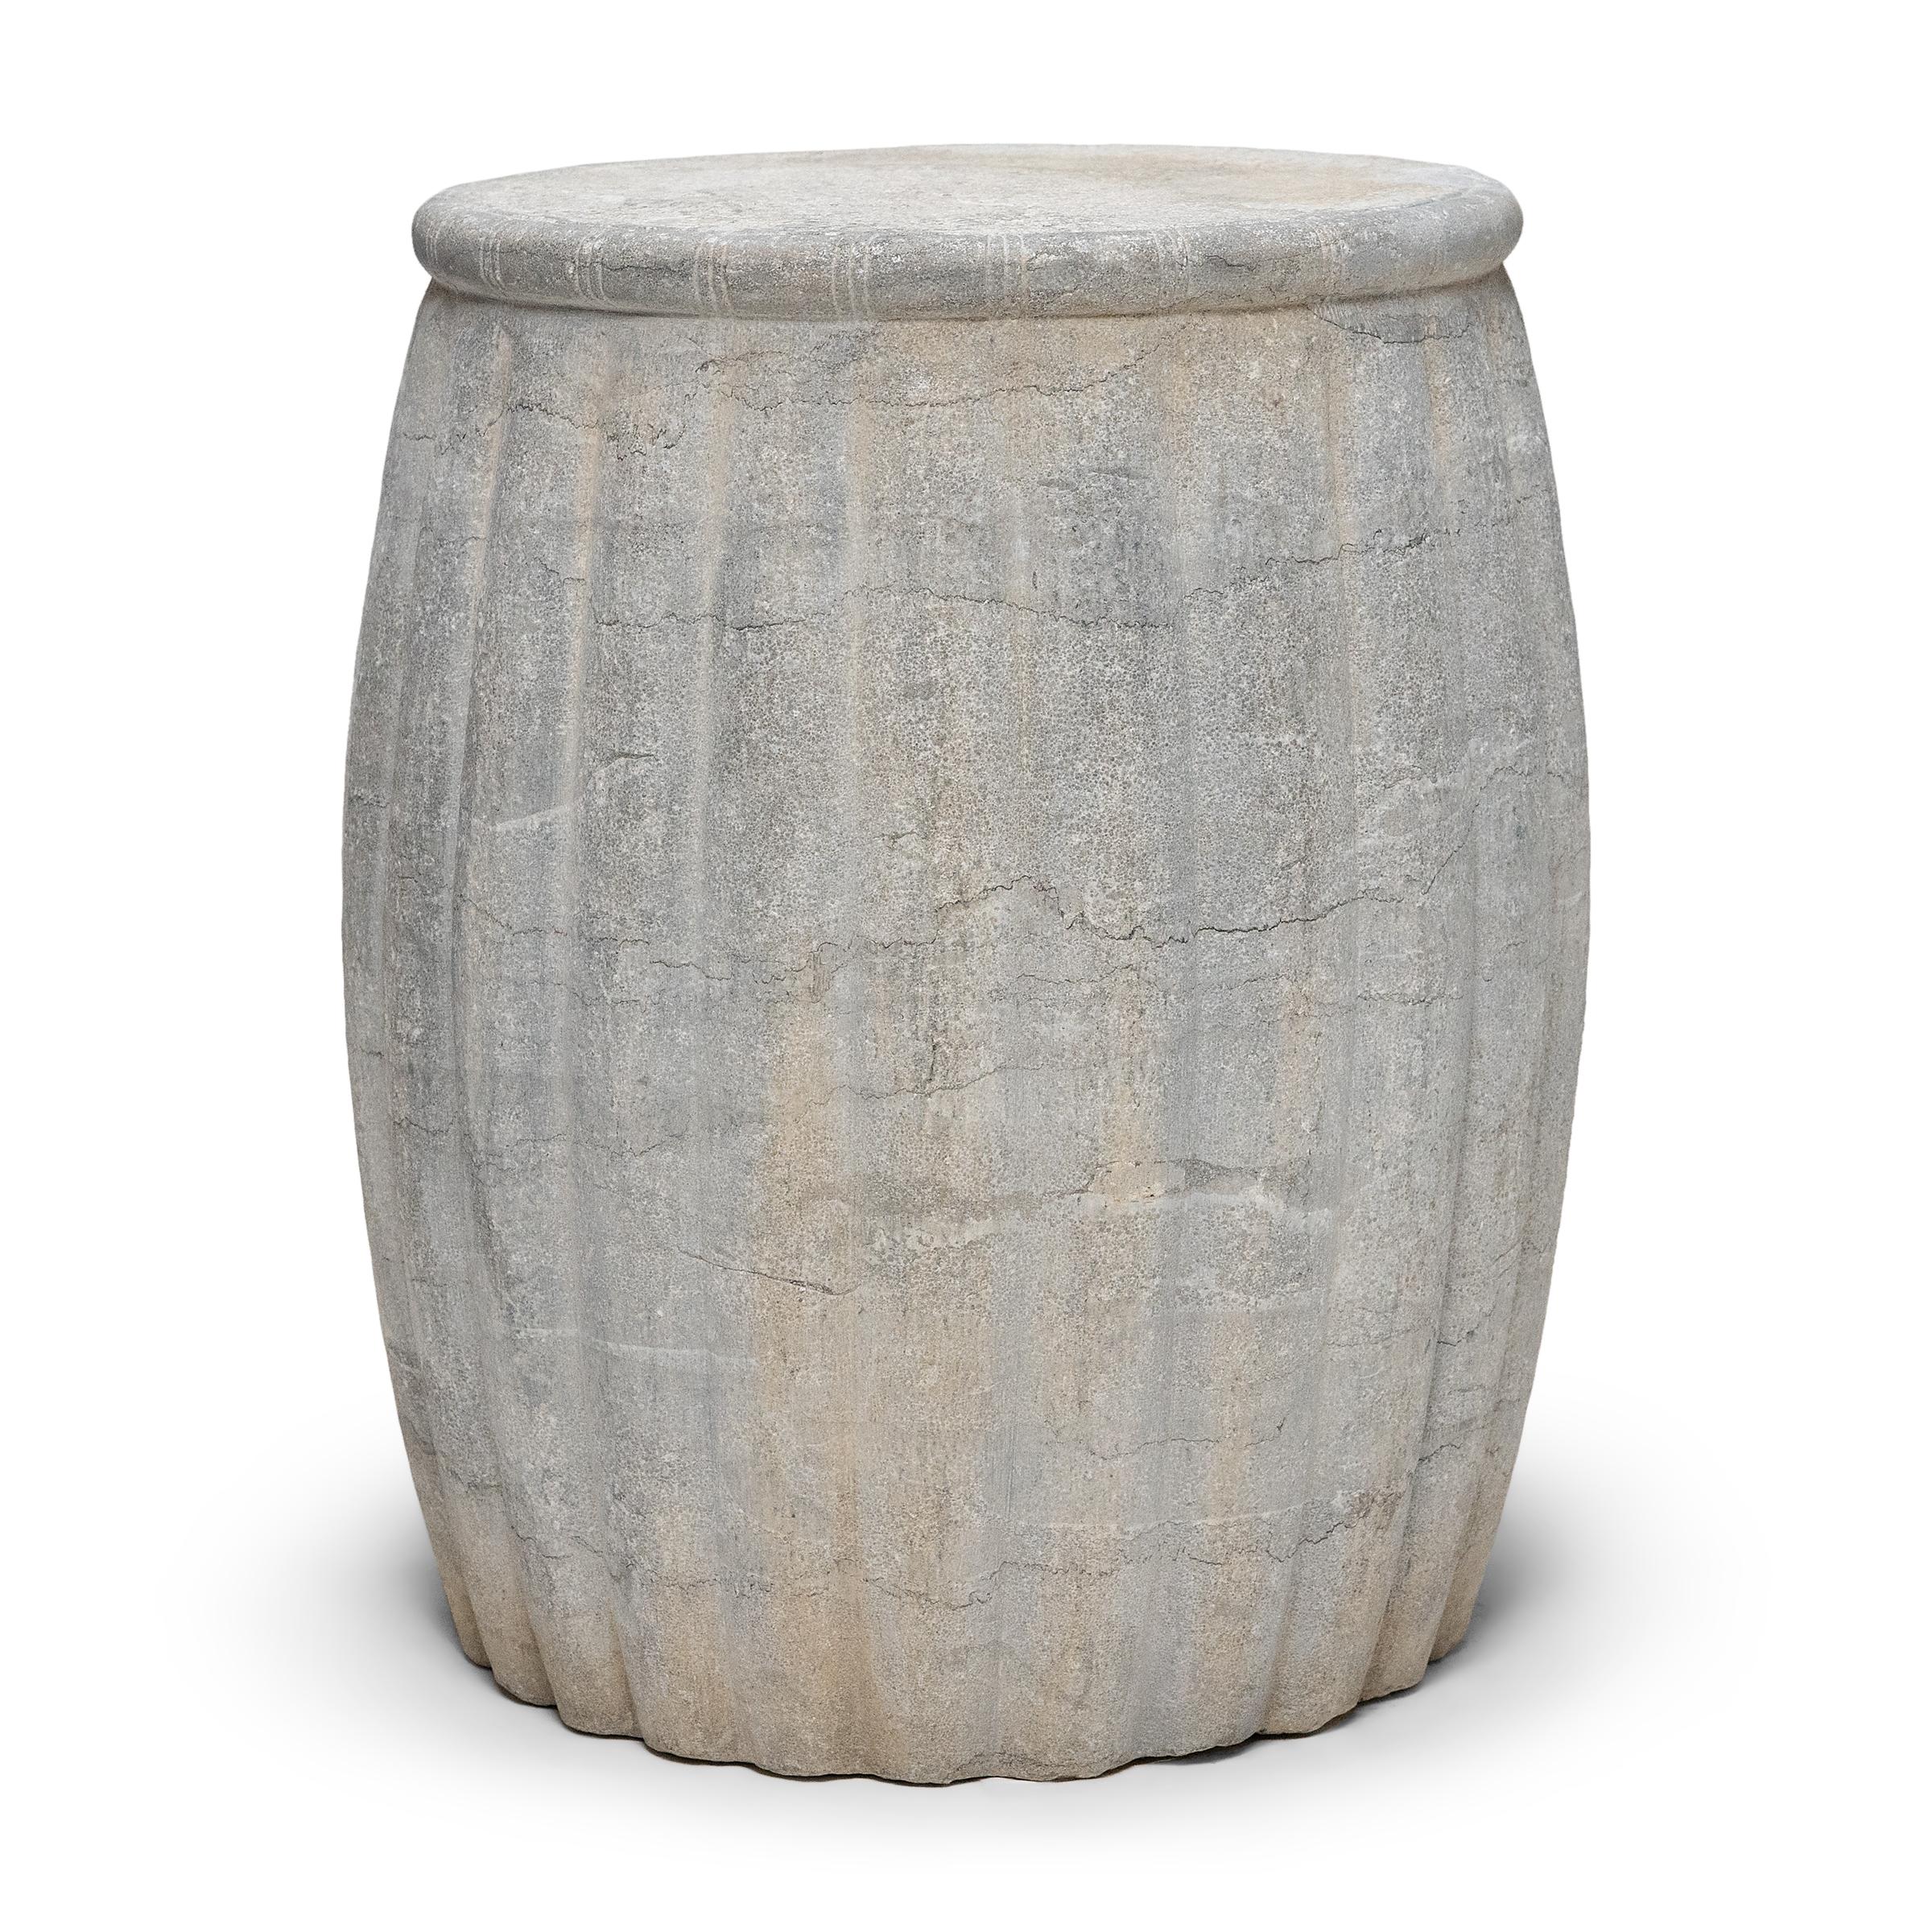 Drum-form stools such as this were traditionally used in gardens and outdoor pavilions where upper class scholars read, wrote, gathered for discussion and, in general, developed their inner sensibilities. This contemporary example is carved from